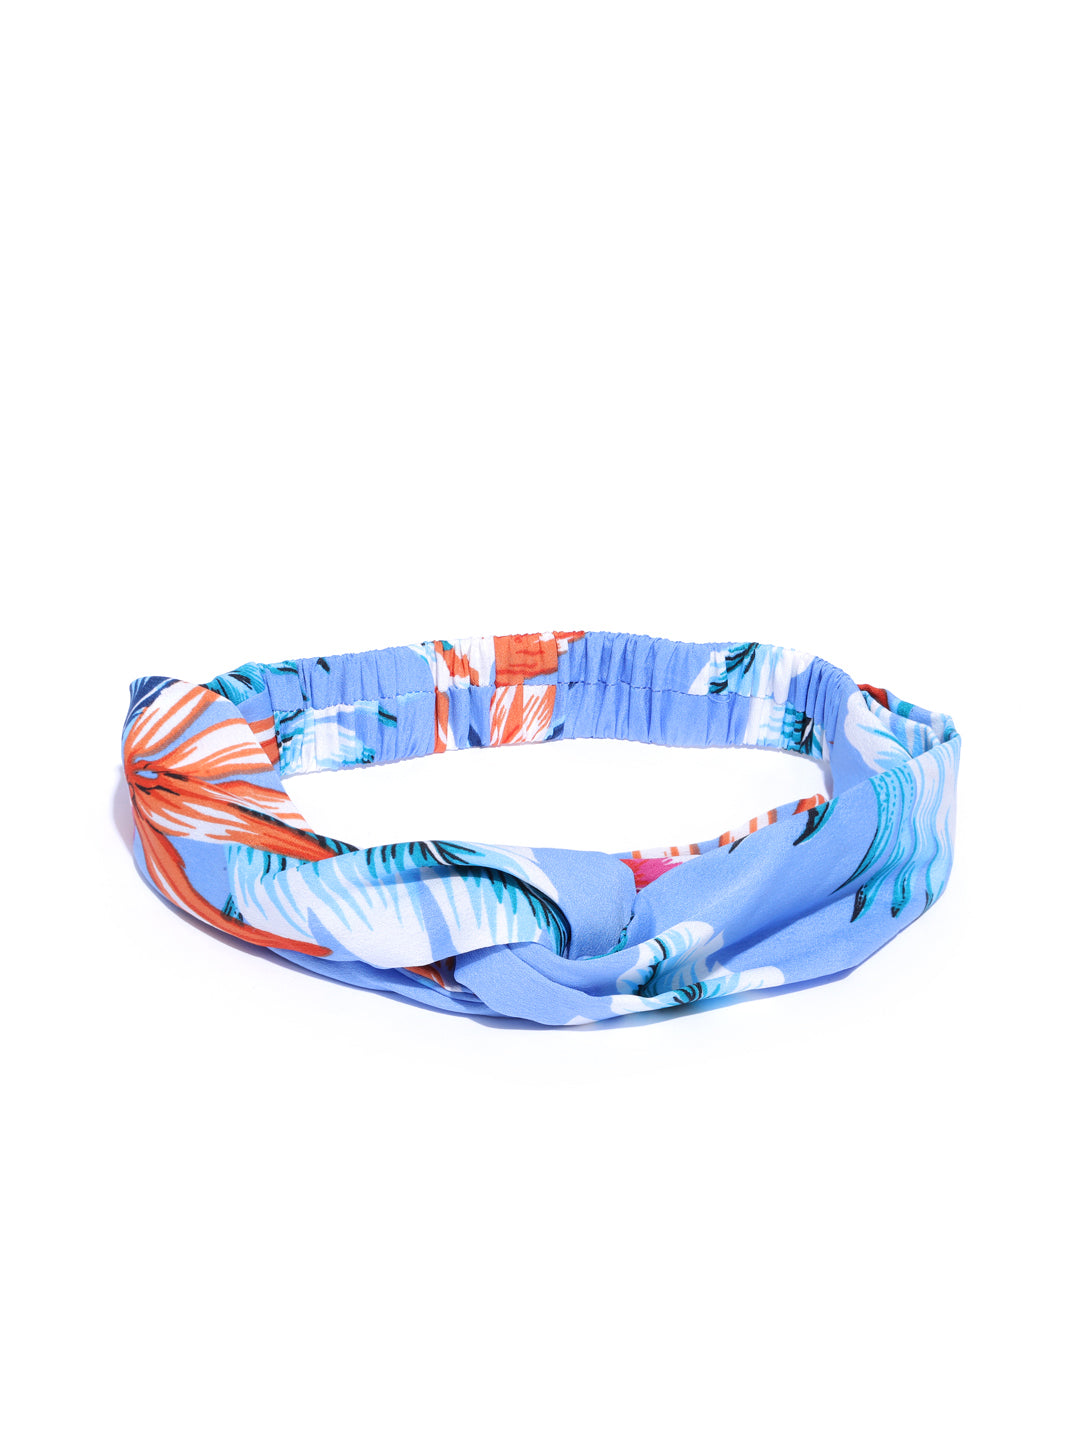 Blueberry multi floral printed satin knot hairband